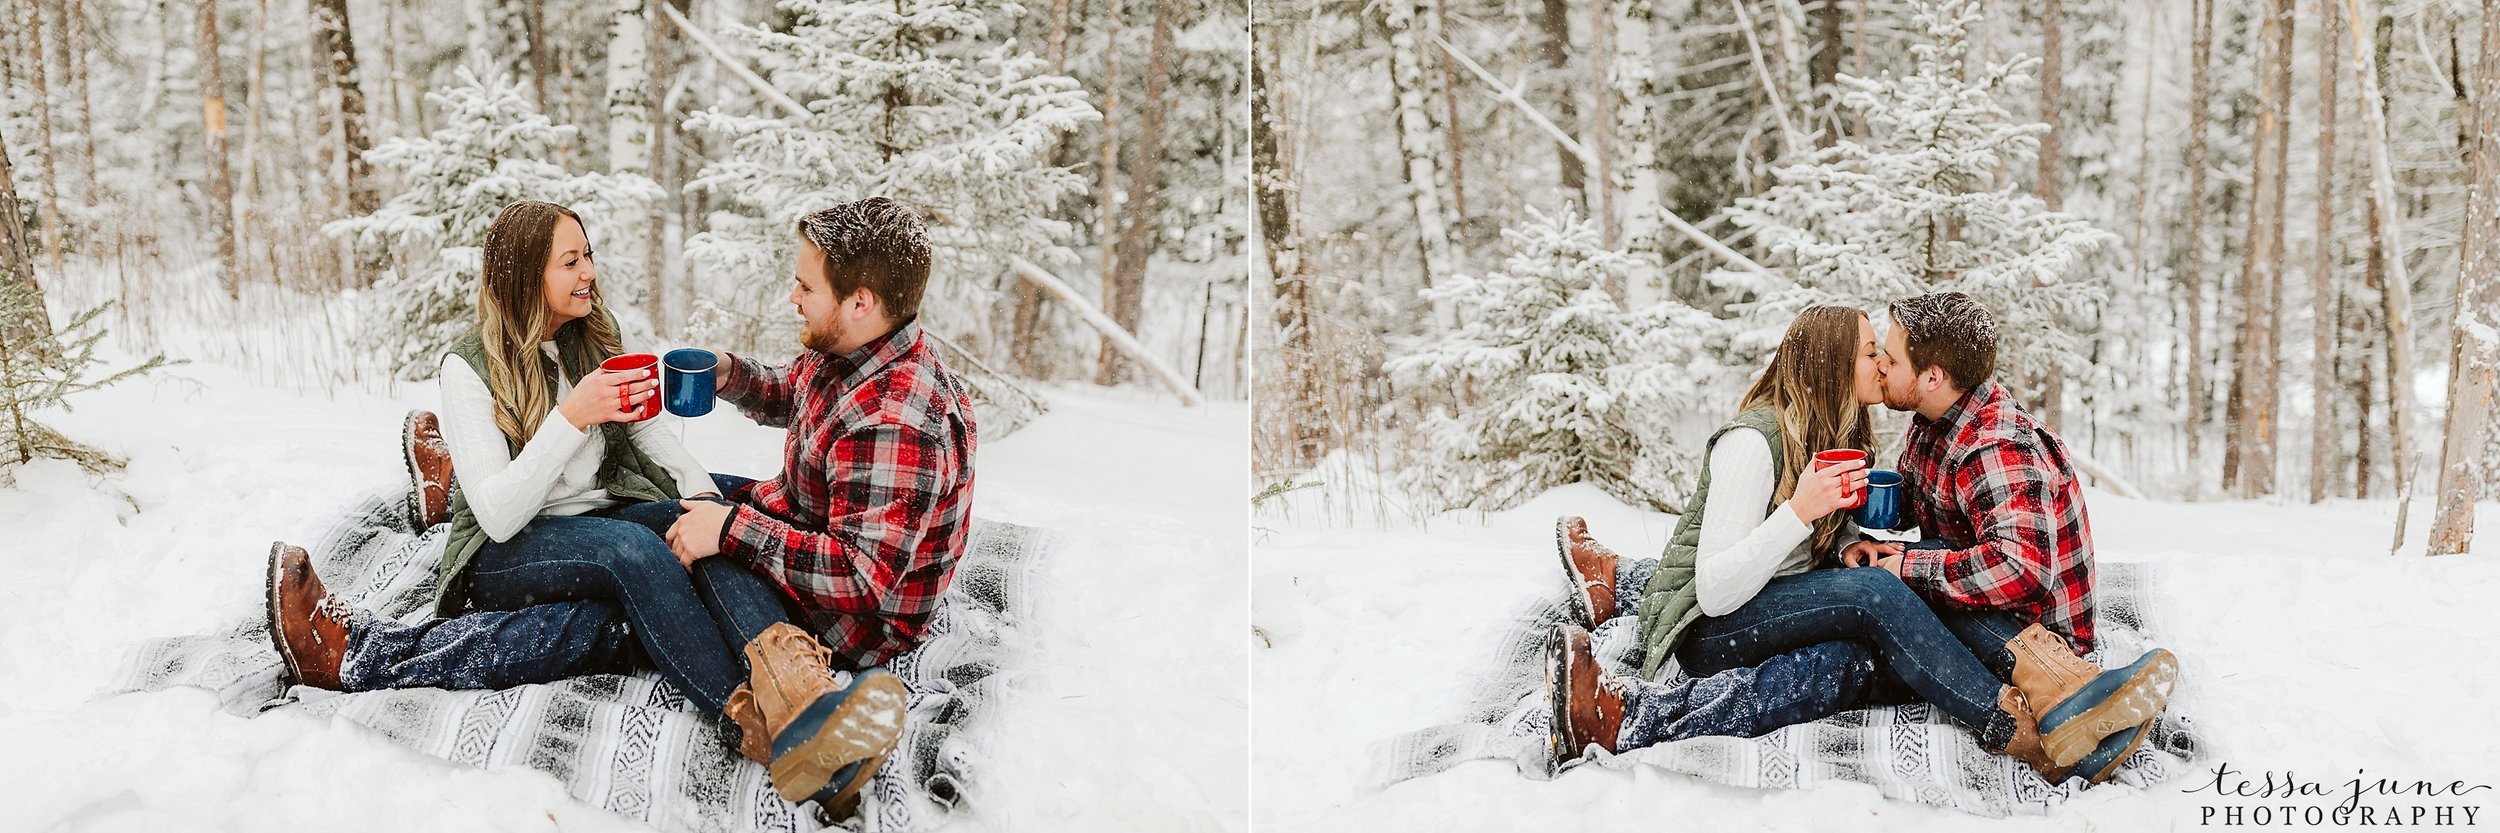 duluth-winter-engagement-forest-photos-during-snow-storm-27.jpg